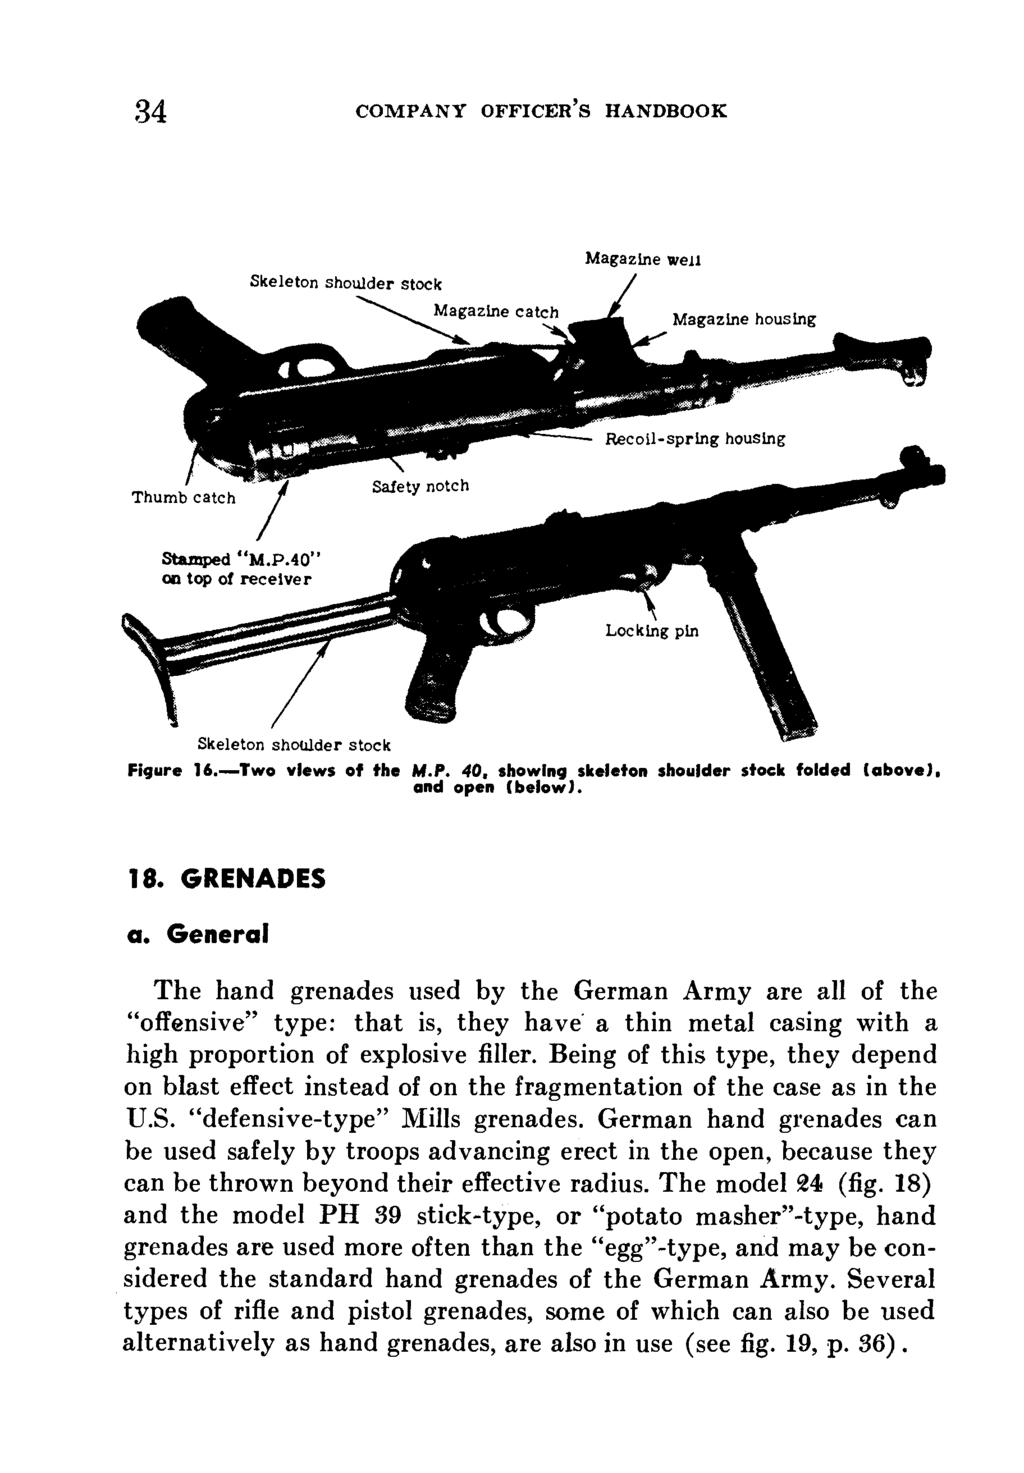 34 COMPANY OFFICER'S HANDBOOK Magazine well Magazne catc Magazlne housing Recoil-spring housing ithumb catcsafety notch Stamped "M.P.40" On top of receiver Locking pin Skeleton shoulder stock Figure 16.